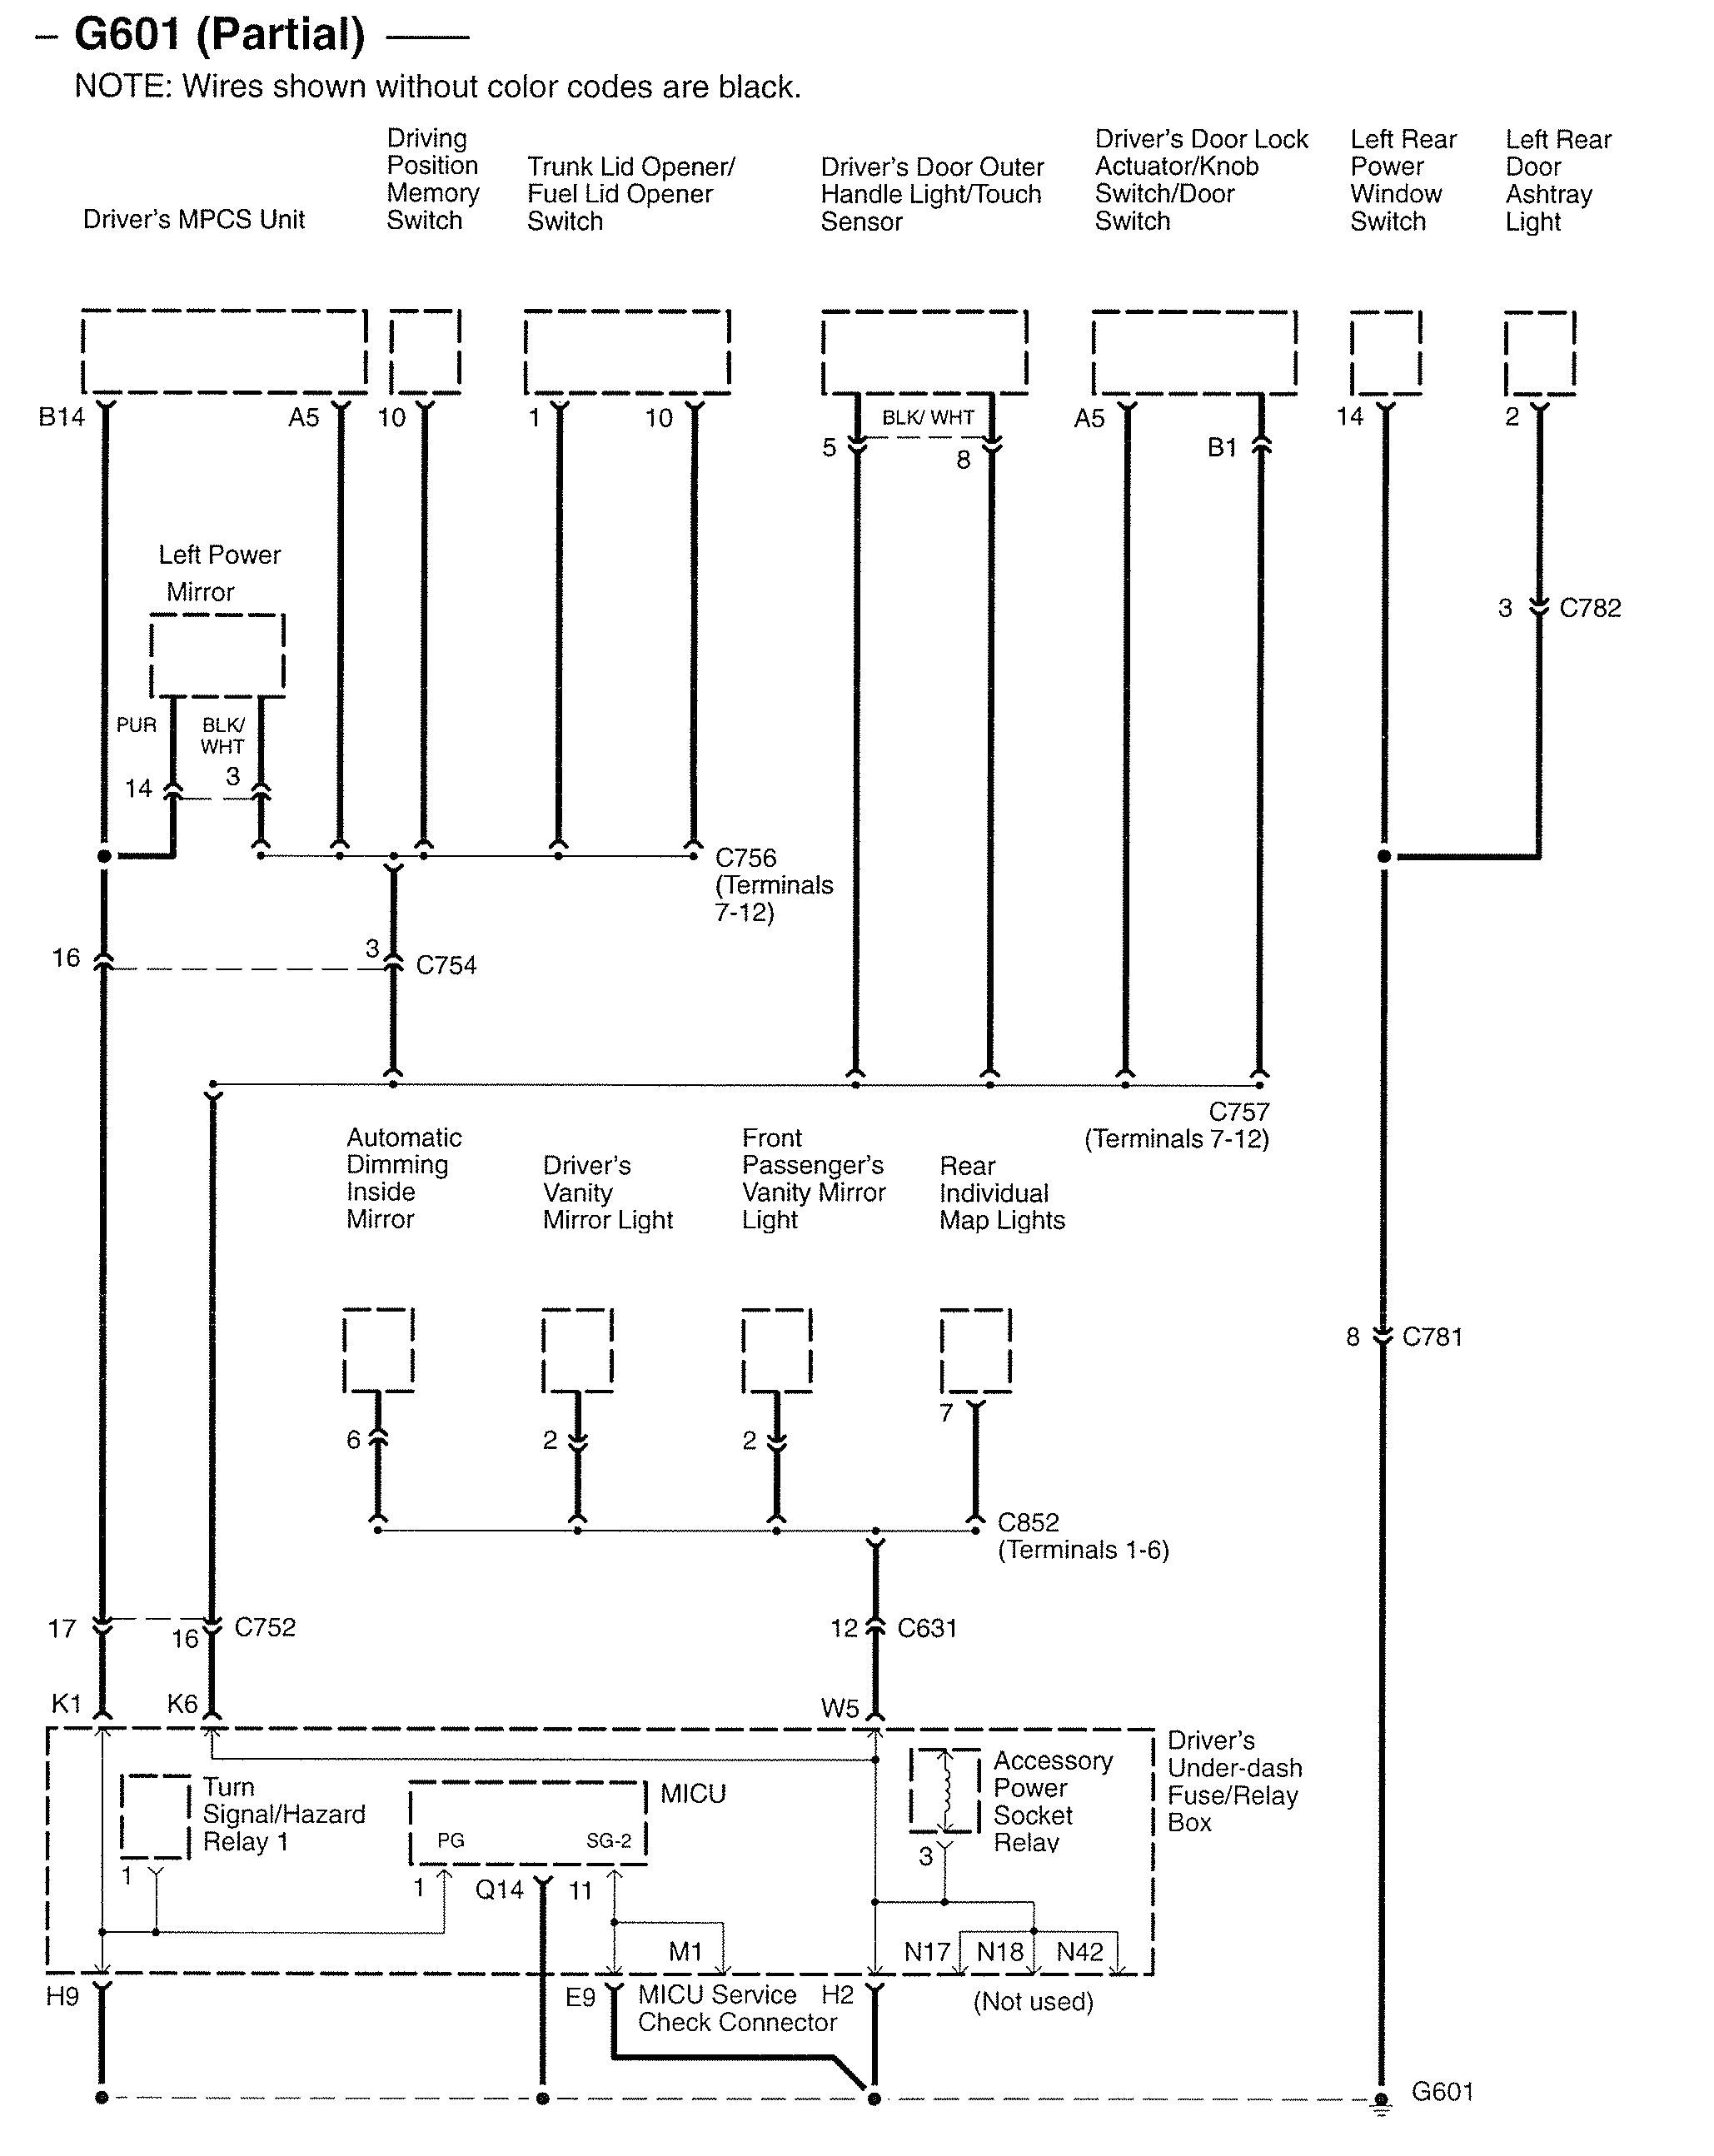 stack light wiring wire center allen bradley 855e bcb wiring diagram rate colorful 89 remarkable electrical lighting diagram image